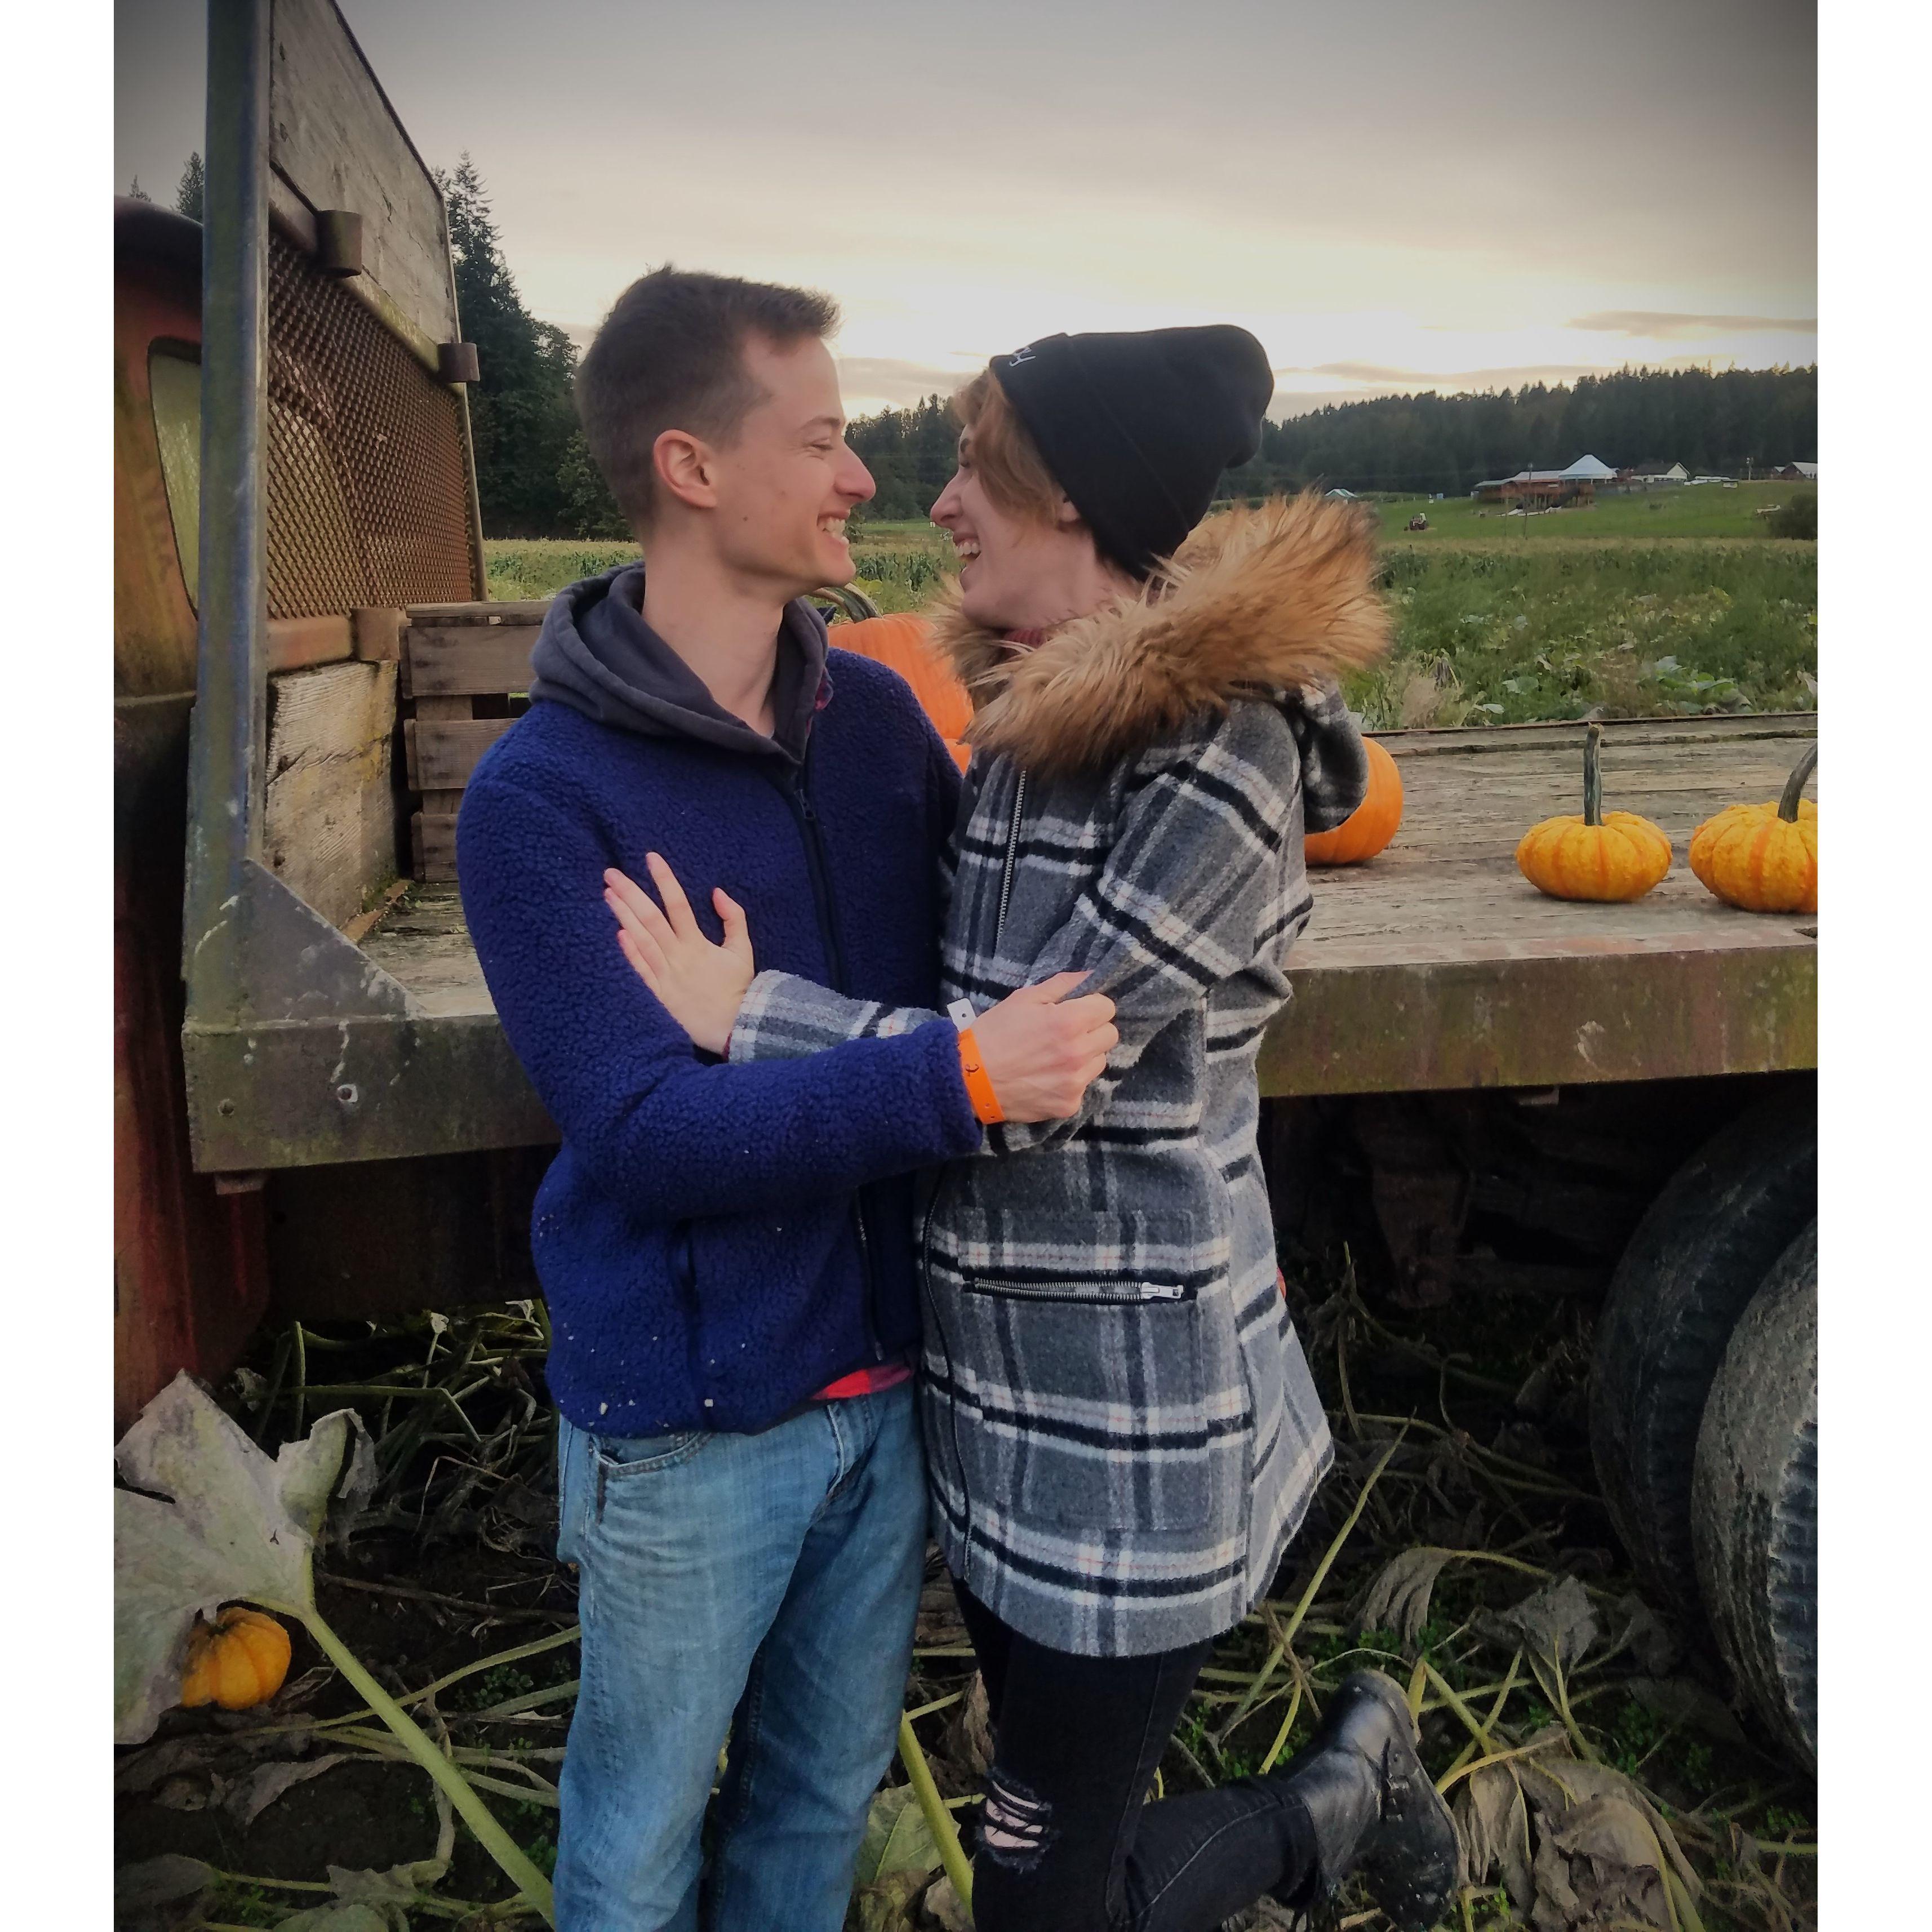 Candid moment at the yearly pumpkin patch visit